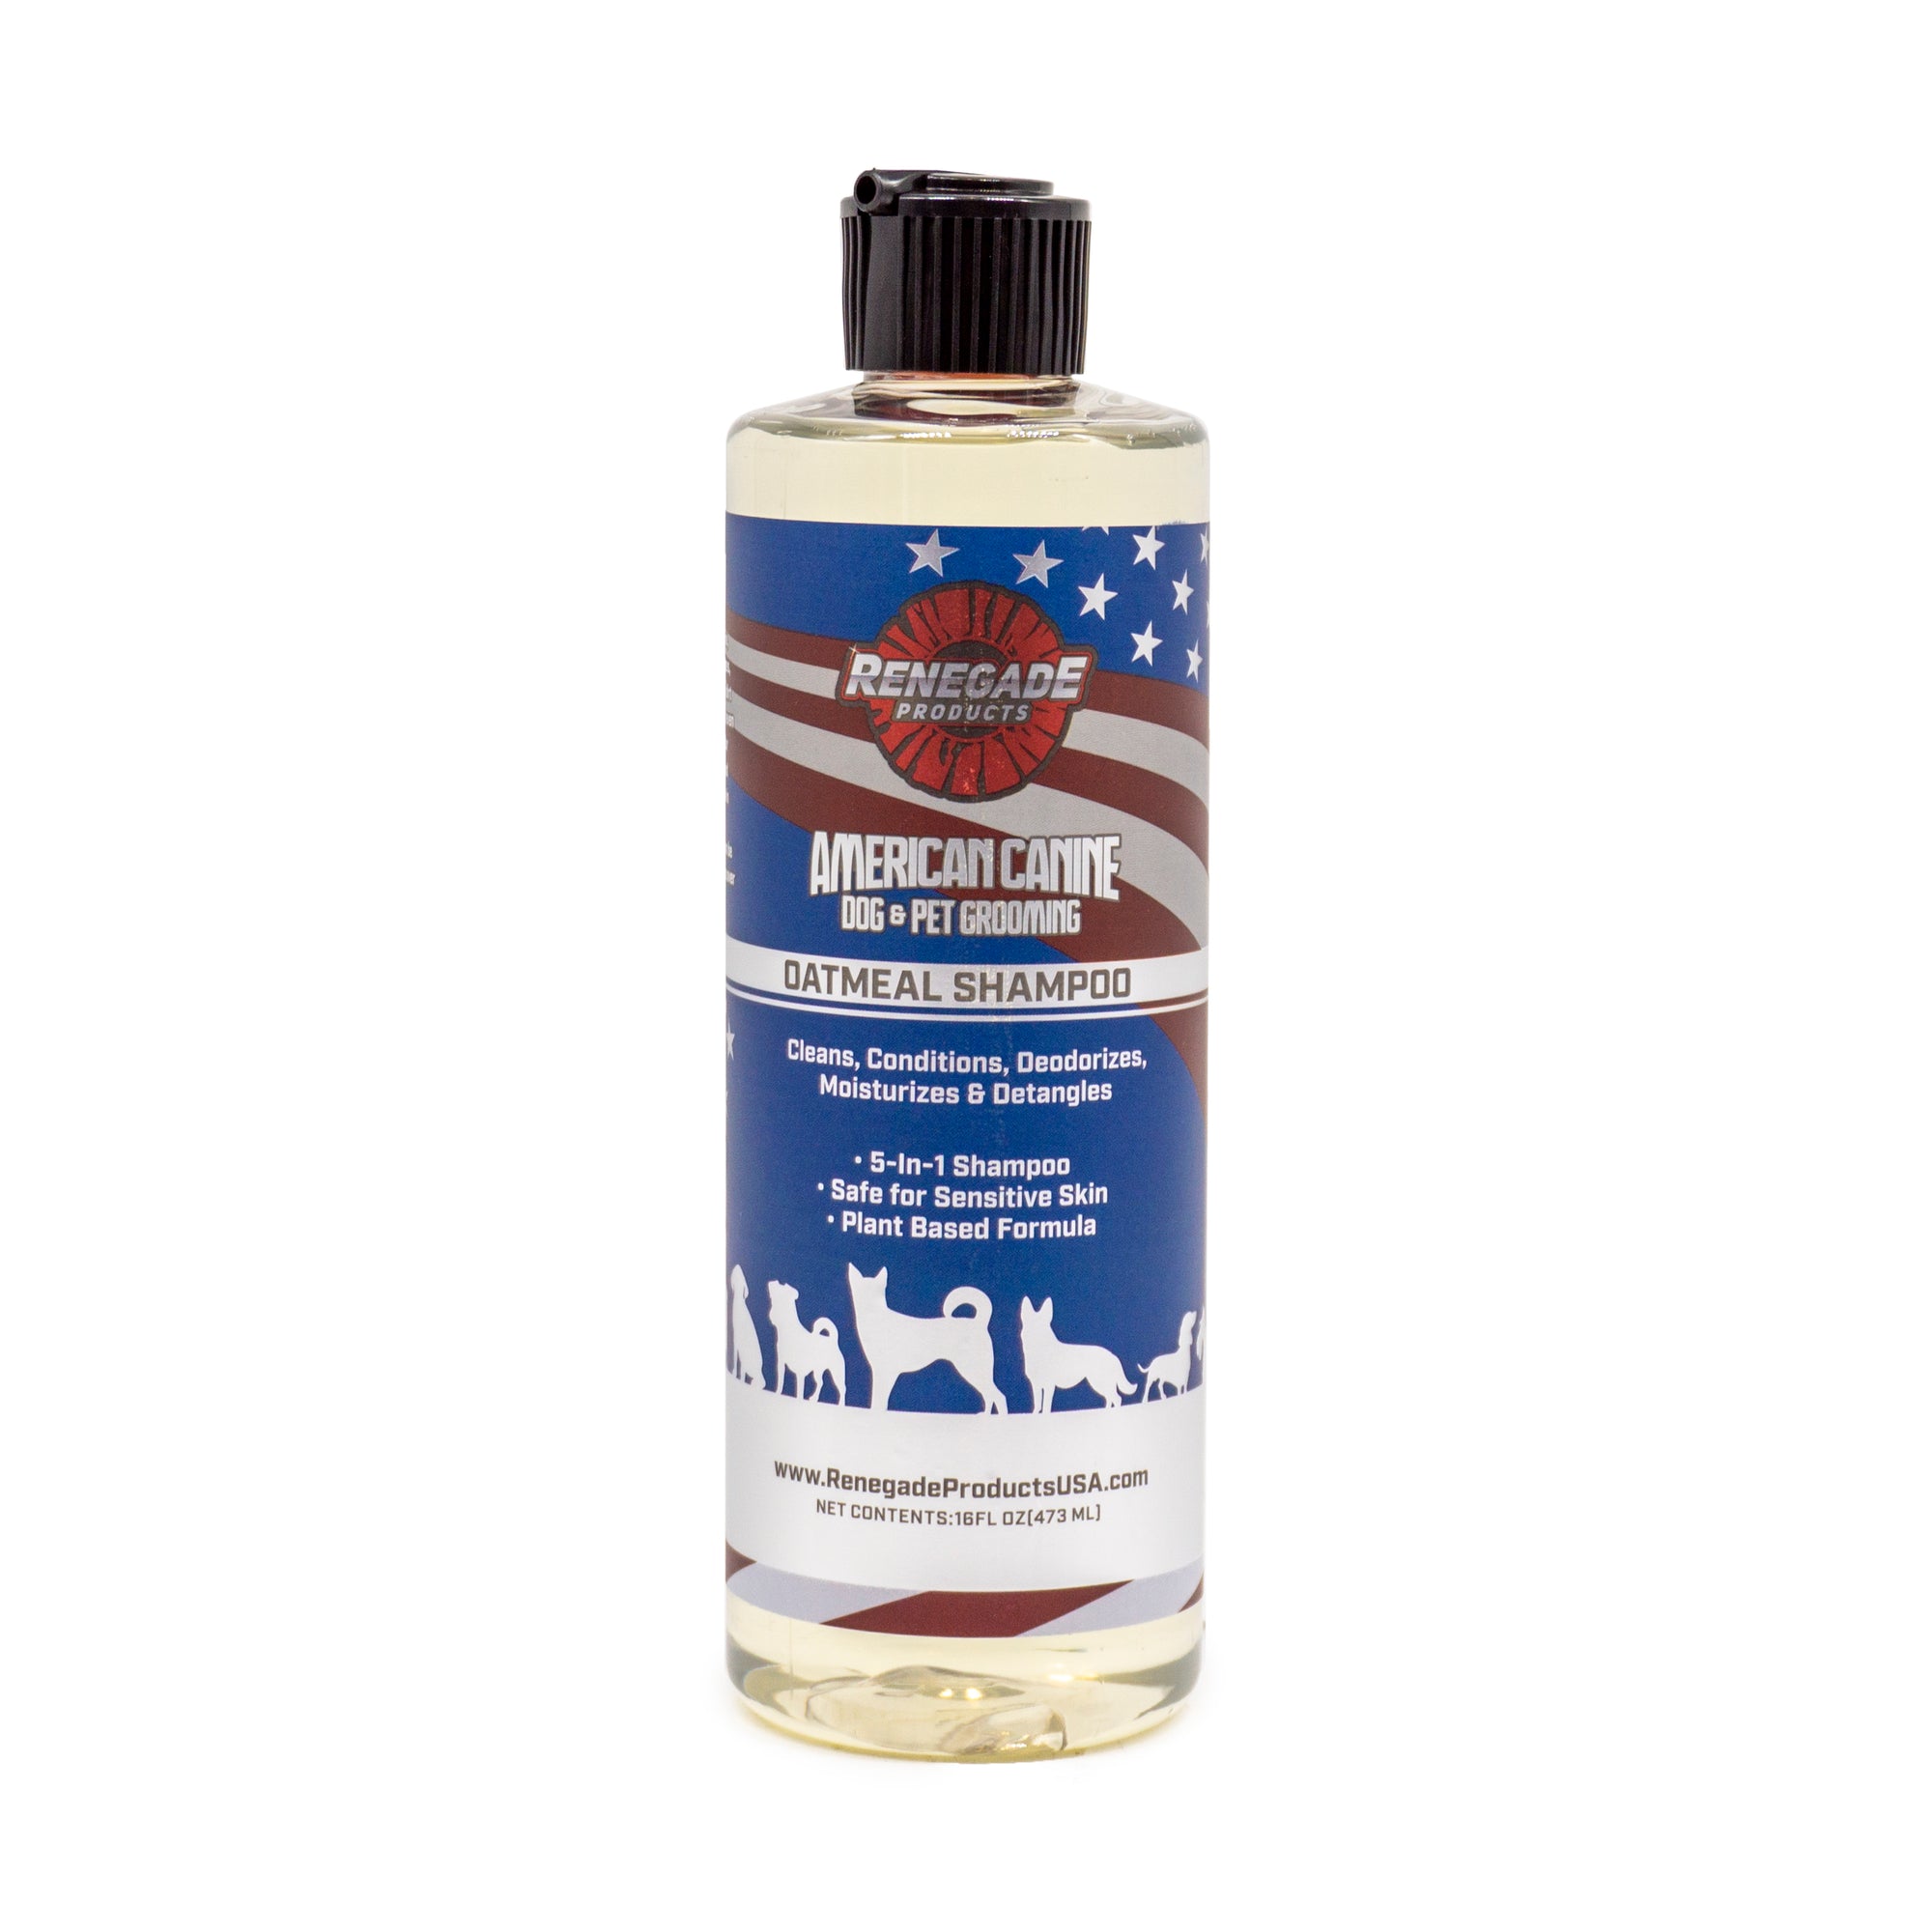 Renegade Products American Canine Line presents a 5-in-1 oatmeal shampoo for dogs, providing nourishment and gentle cleansing for healthy coats